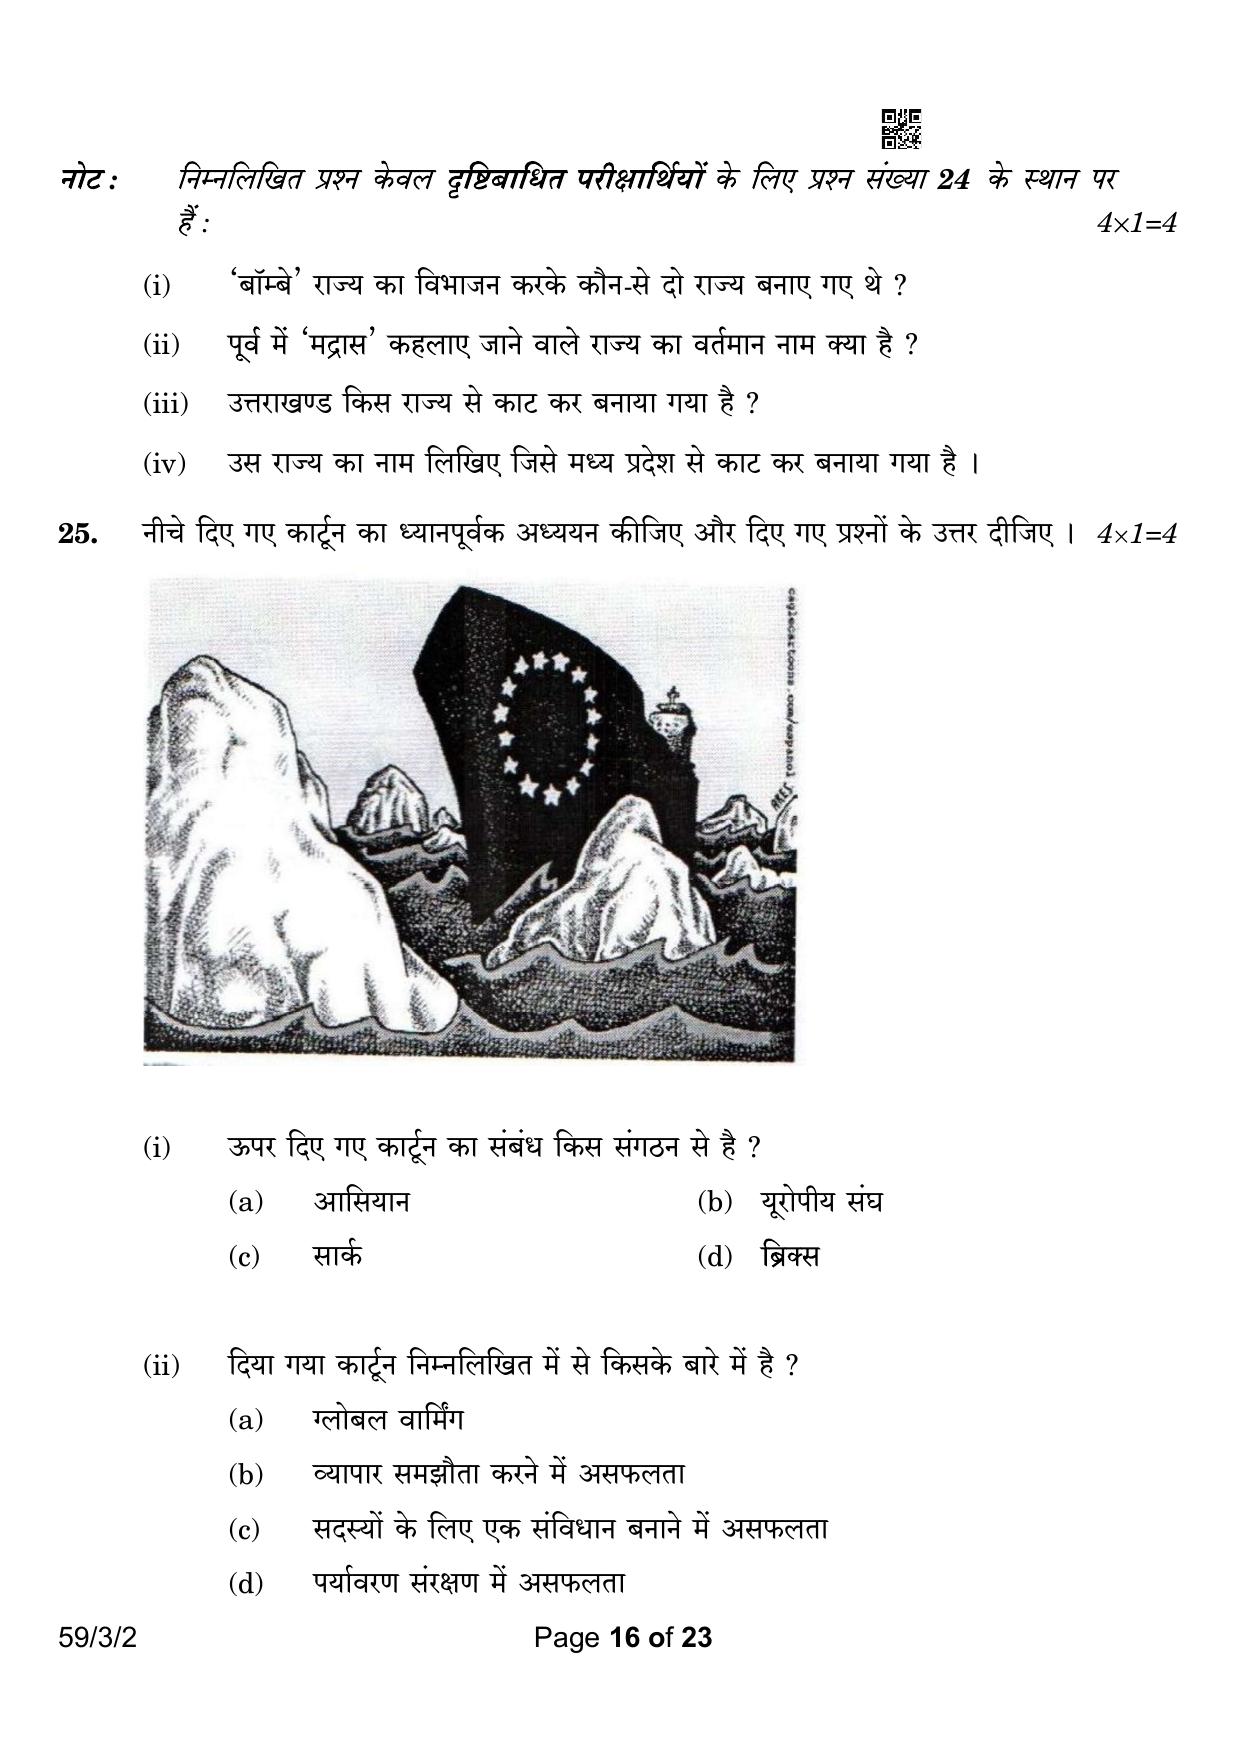 CBSE Class 12 59-3-2 Political Science 2023 Question Paper - Page 16